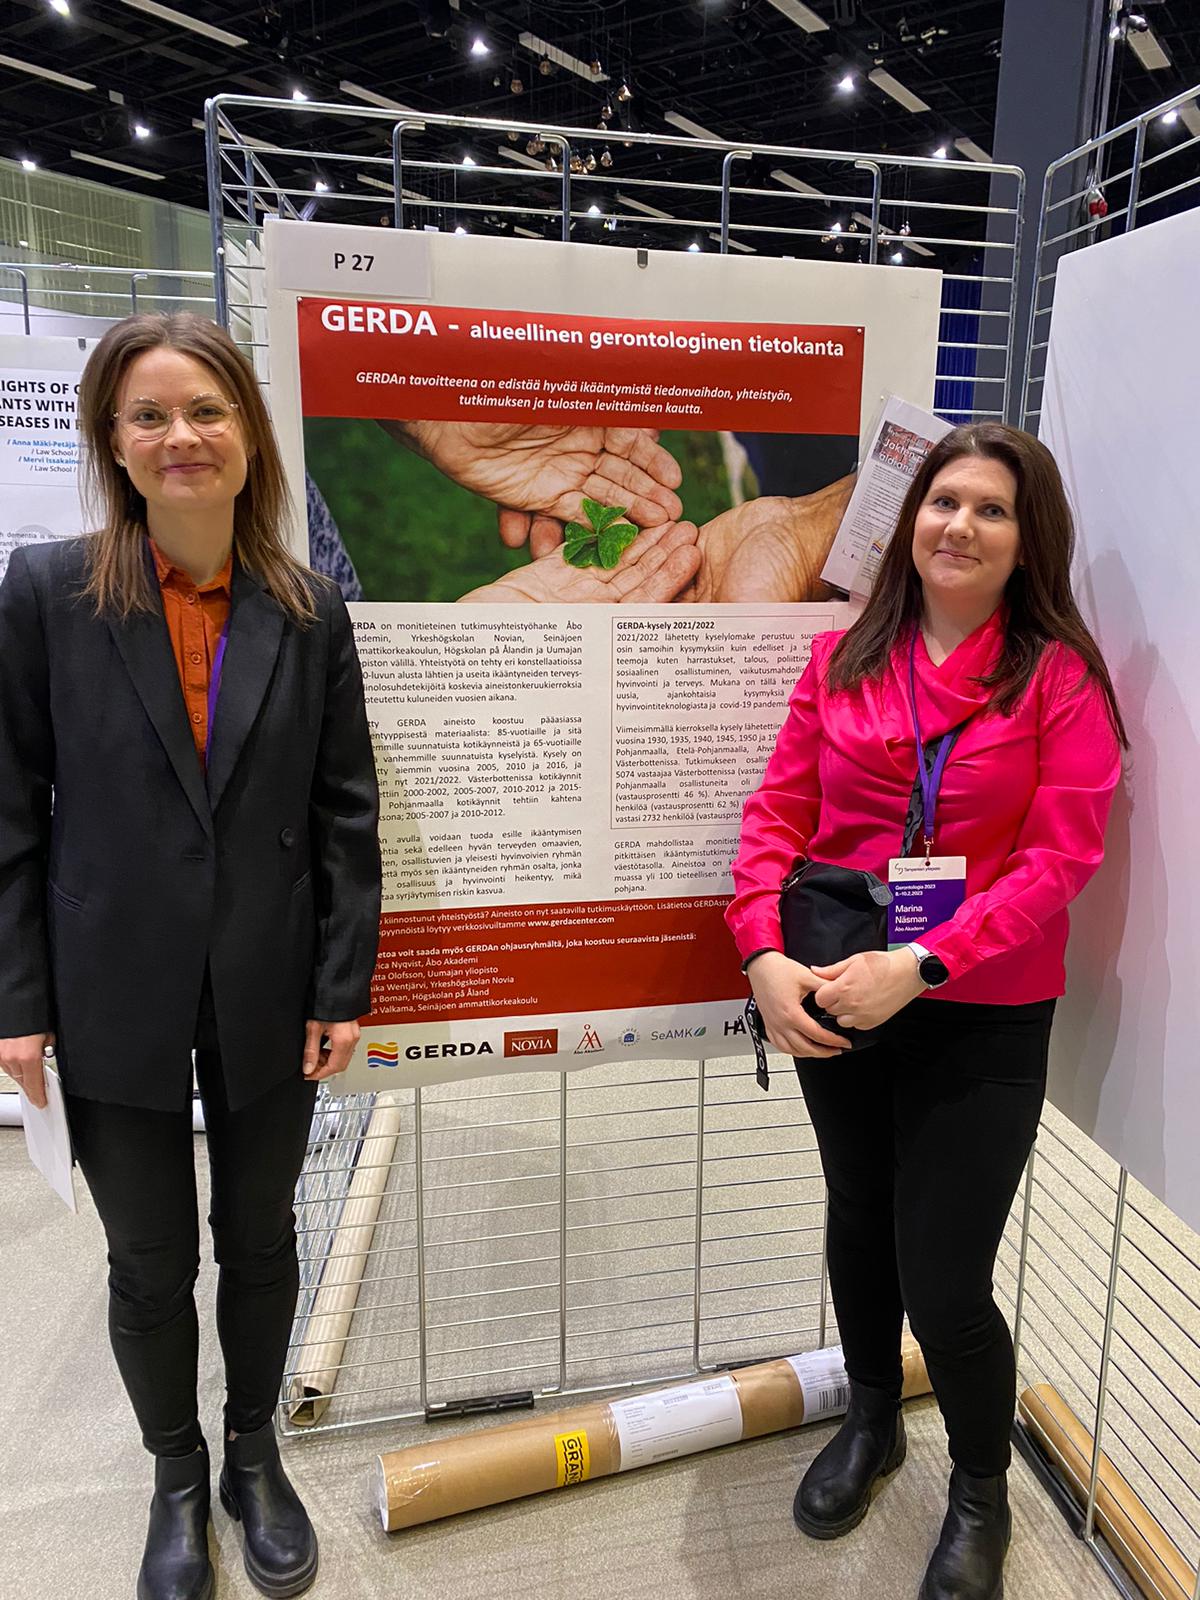 GERDA was presented at the Gerontologia congress in Finland